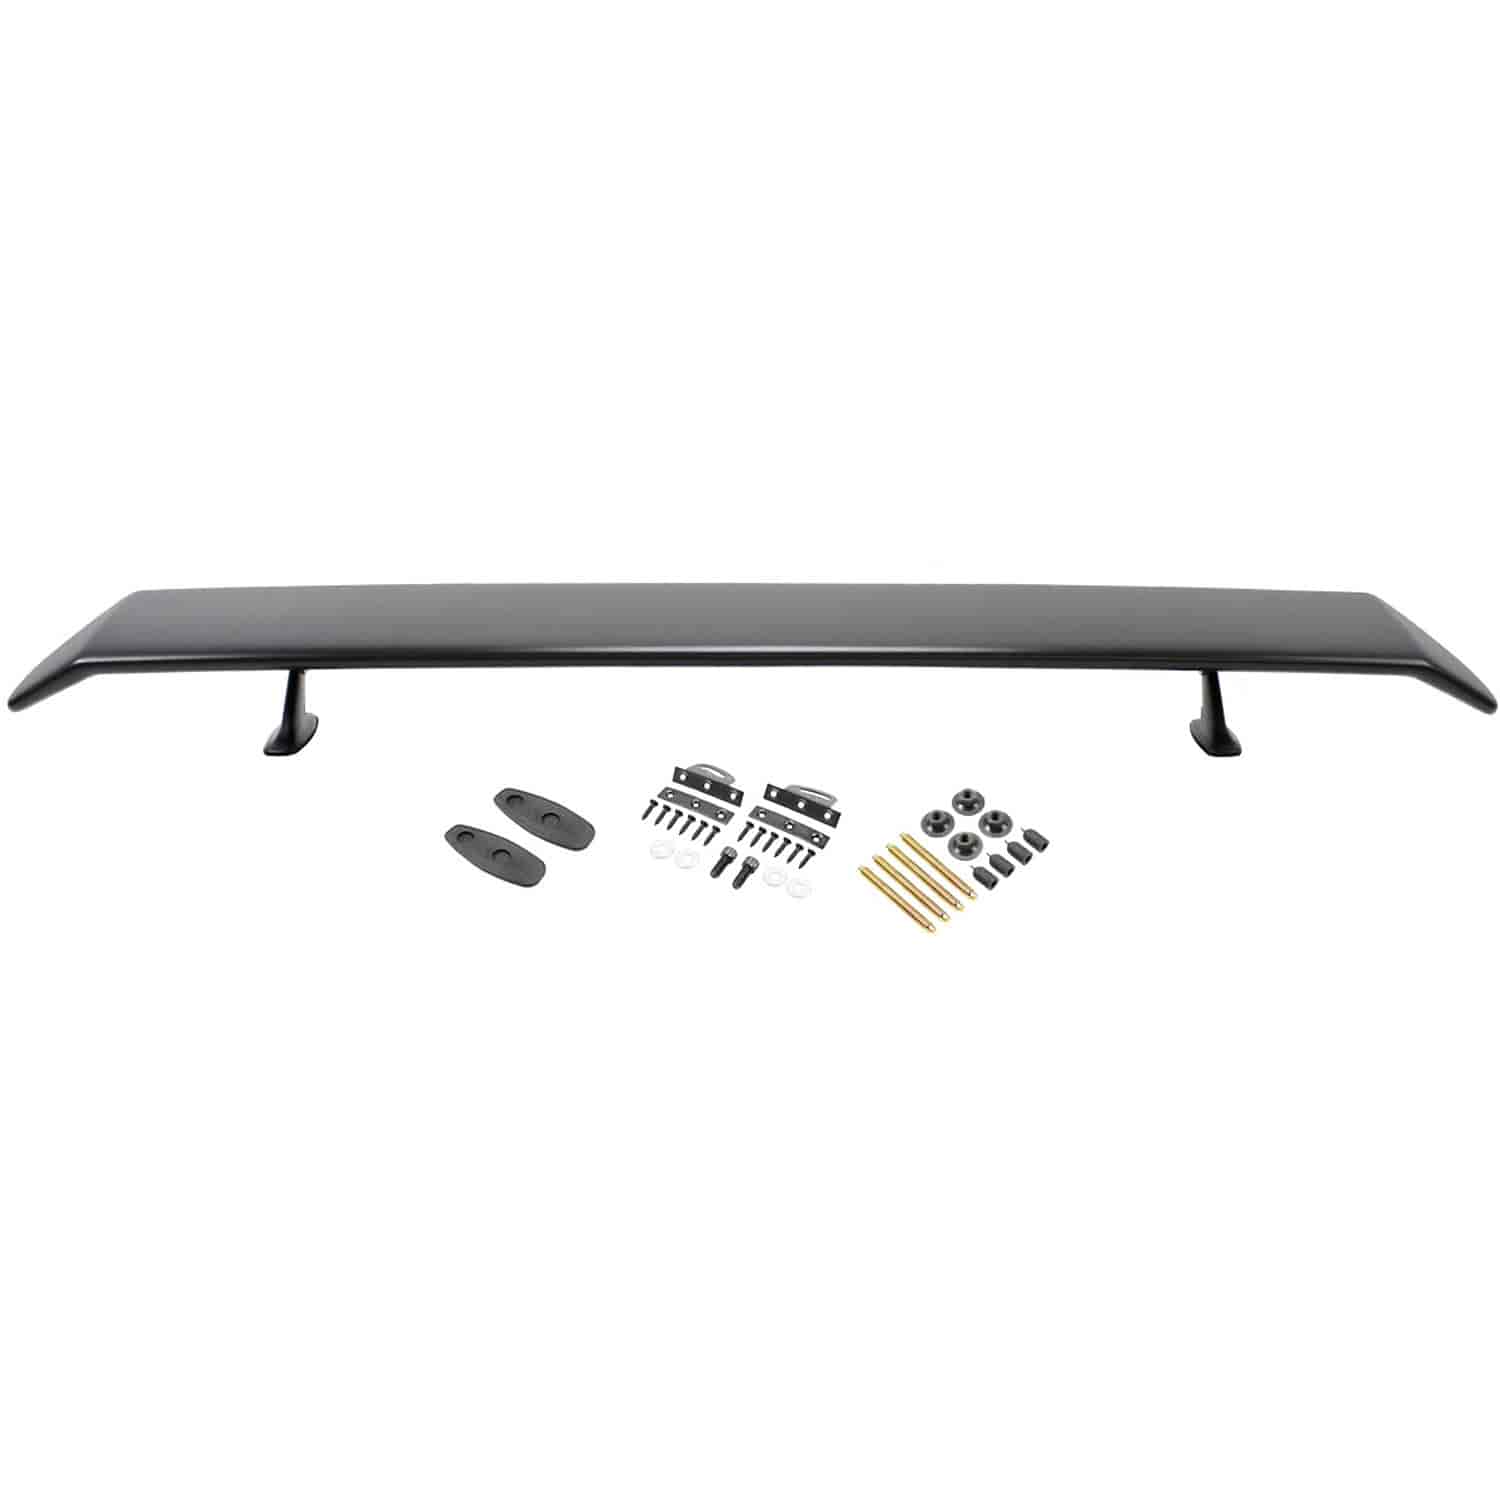 70-71 Ford Rear Wing Spoiler with Stanchions Basic Universal Kit 36 Organosol Black